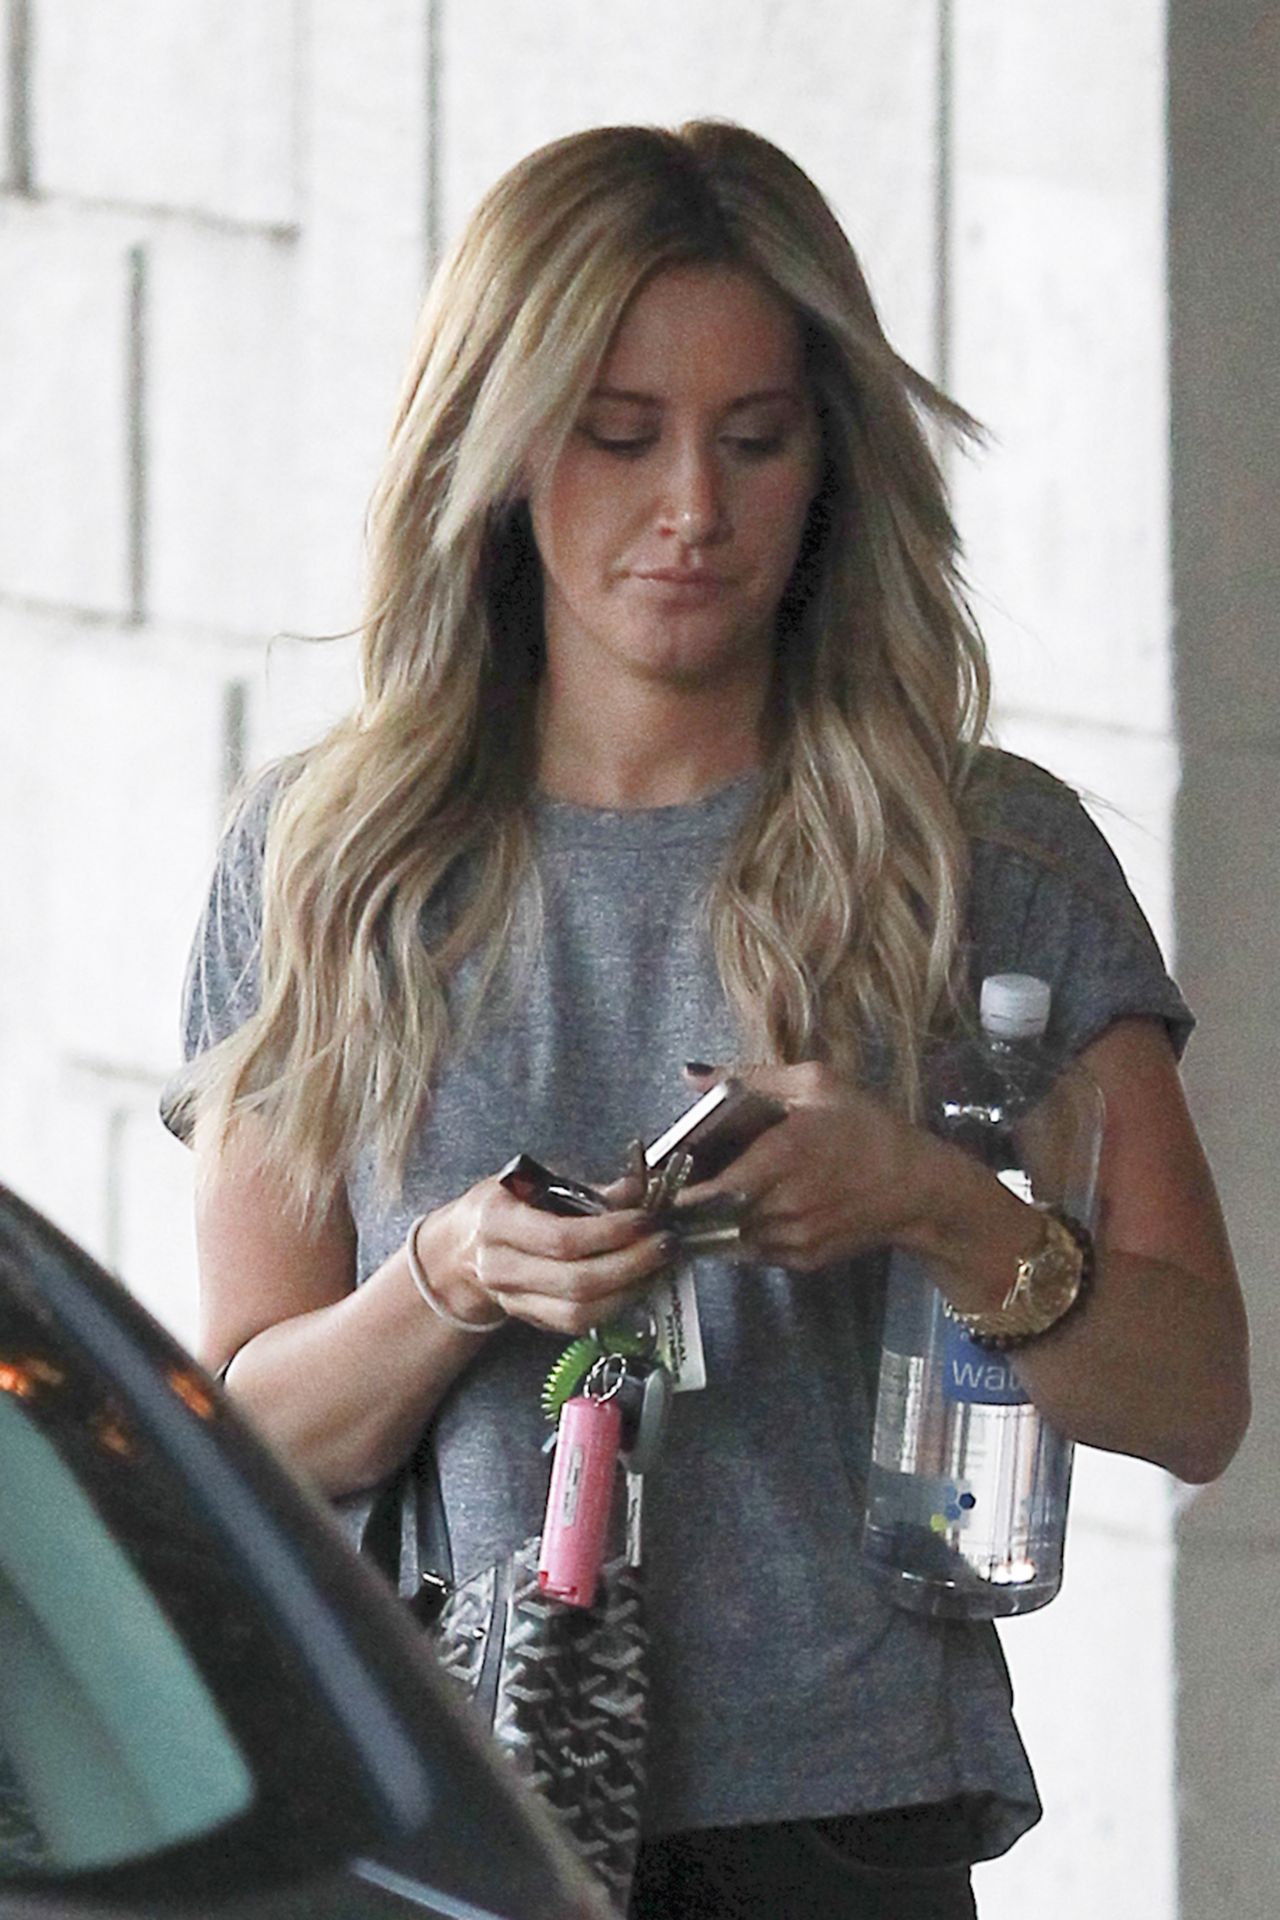 Ashley Tisdale Beverly Hills April 25, 2013 – Star Style